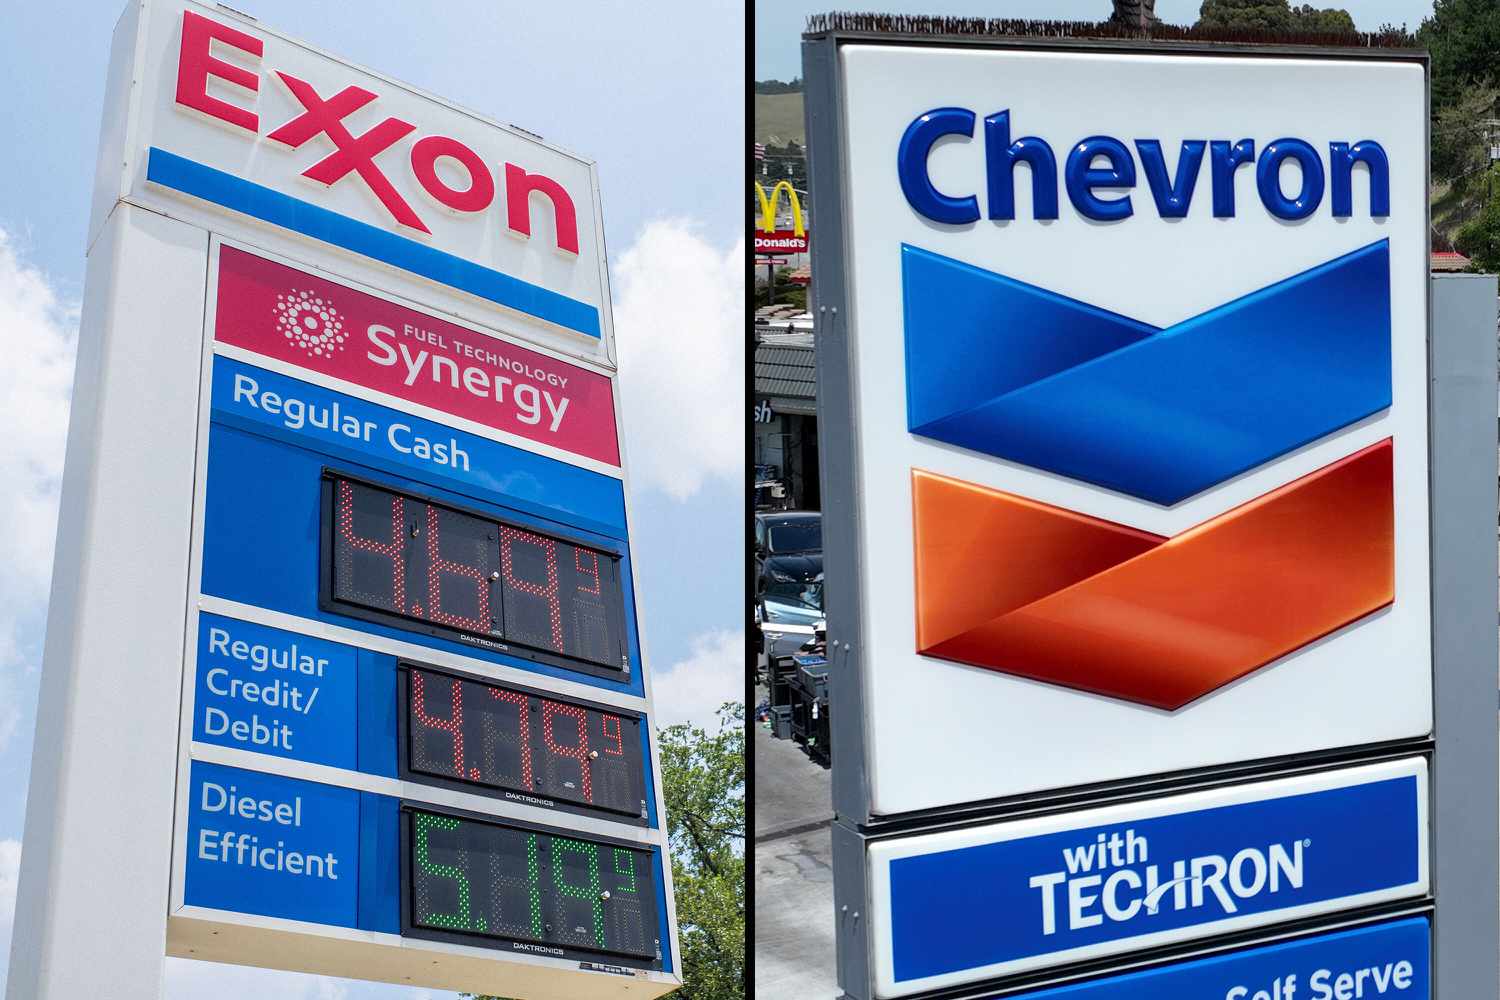 Why ExxonMobil and Chevron Q1 Earnings Are Expected To Fall Despite Rising Oil Prices [Video]